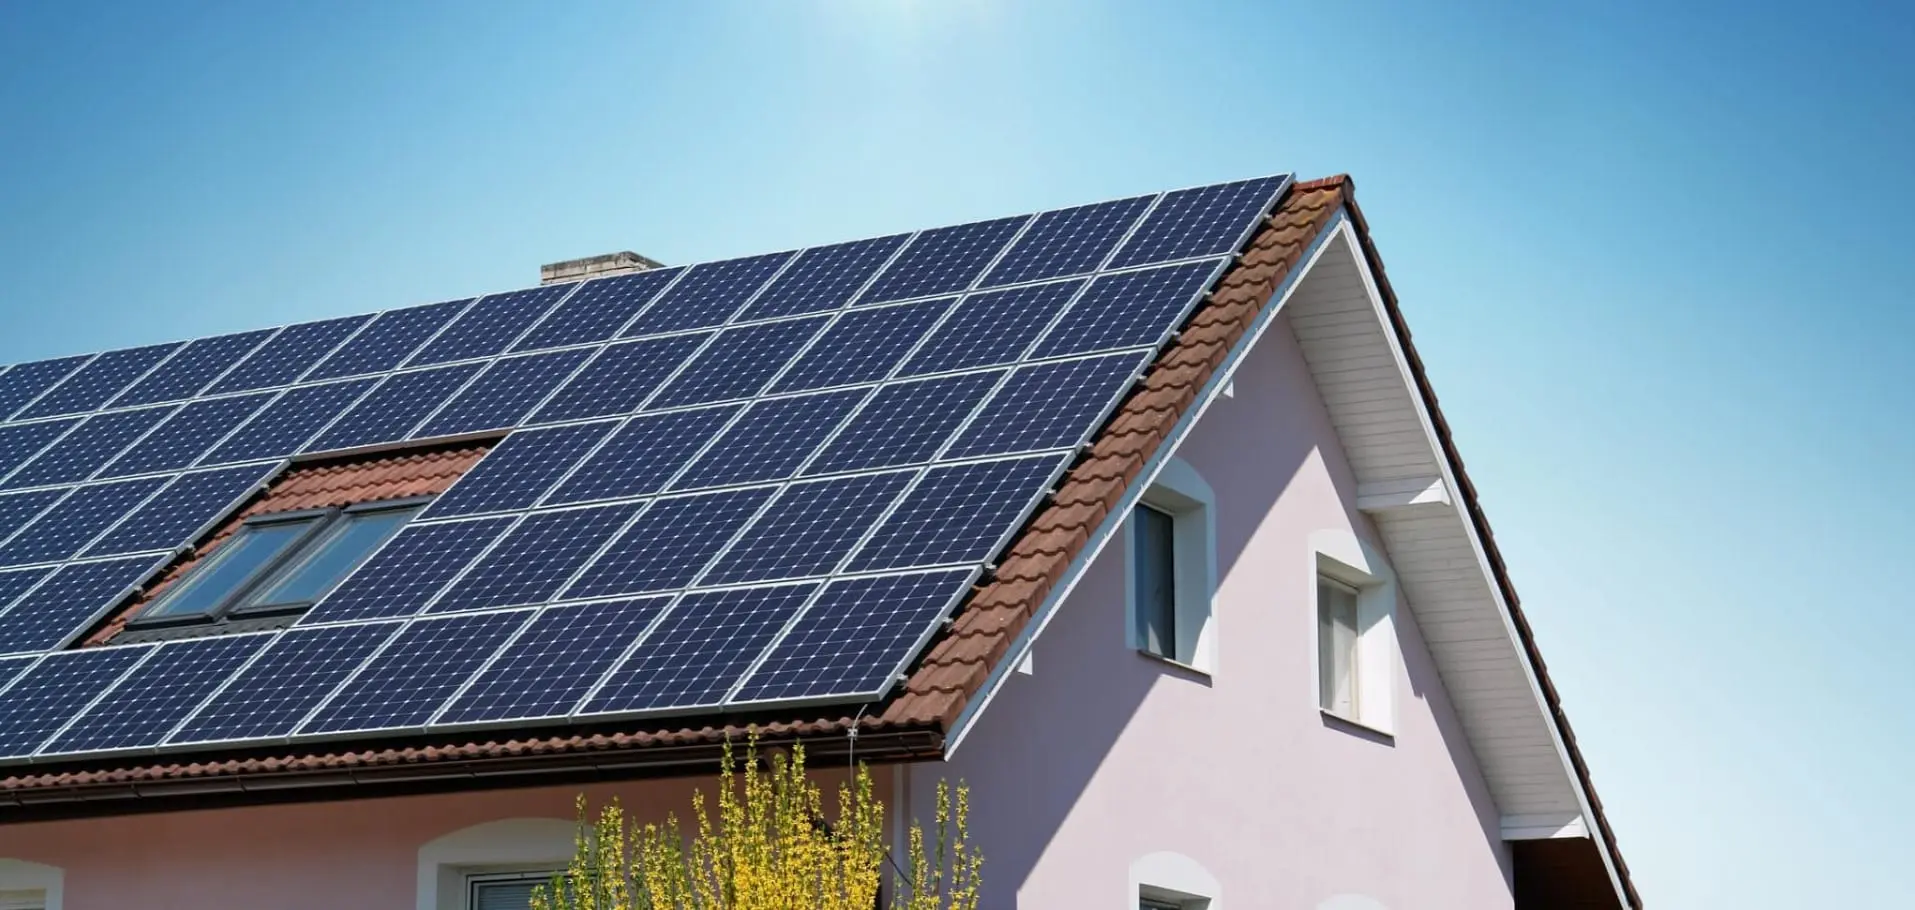 discount solar panels - What is the Ibi discount for solar panels